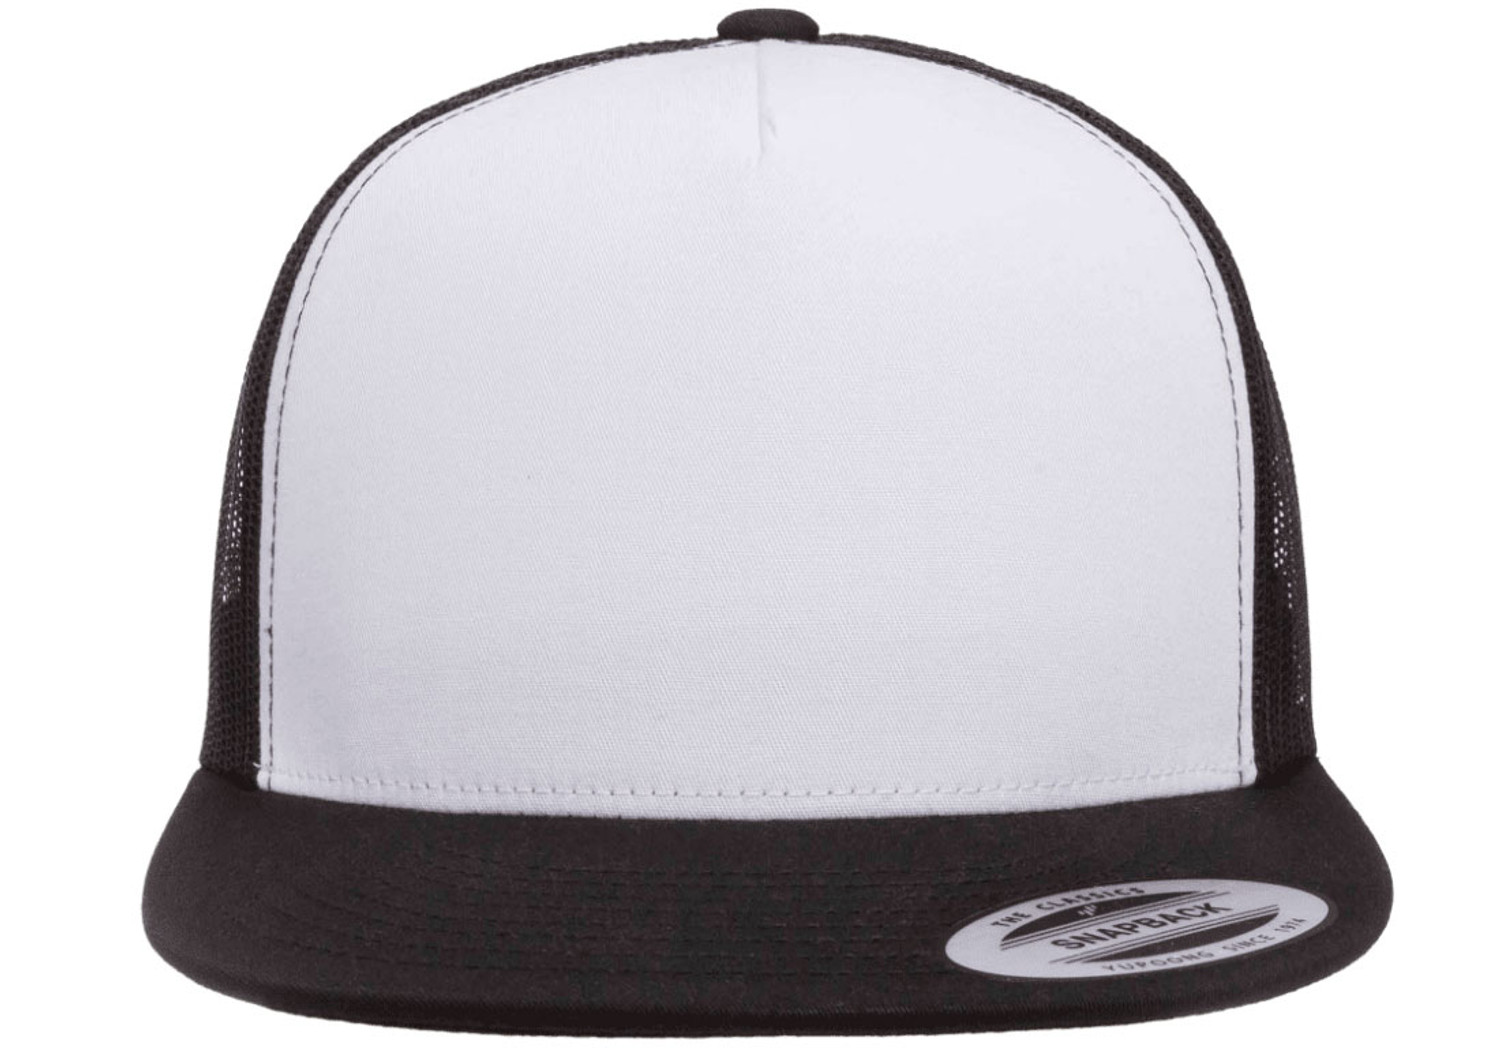 Yupoong 6006W adult Classic Trucker with White Front Panel Cap Black/ Wht / Blk